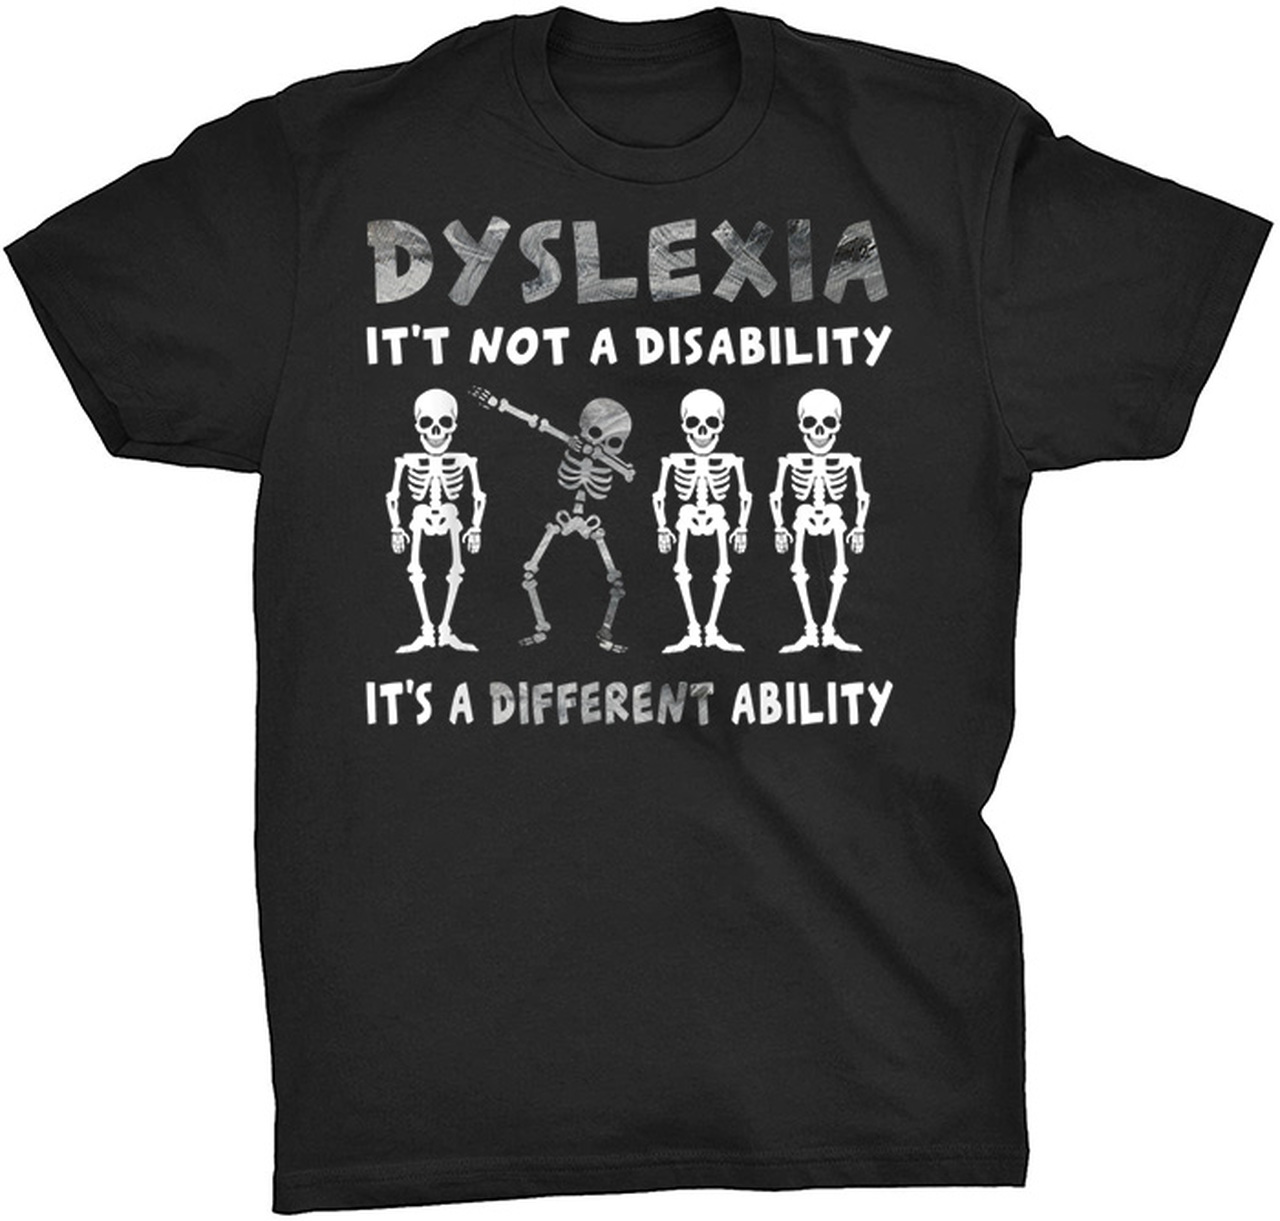 T shirt: Dyslexia is not a disability, it's a different ability.